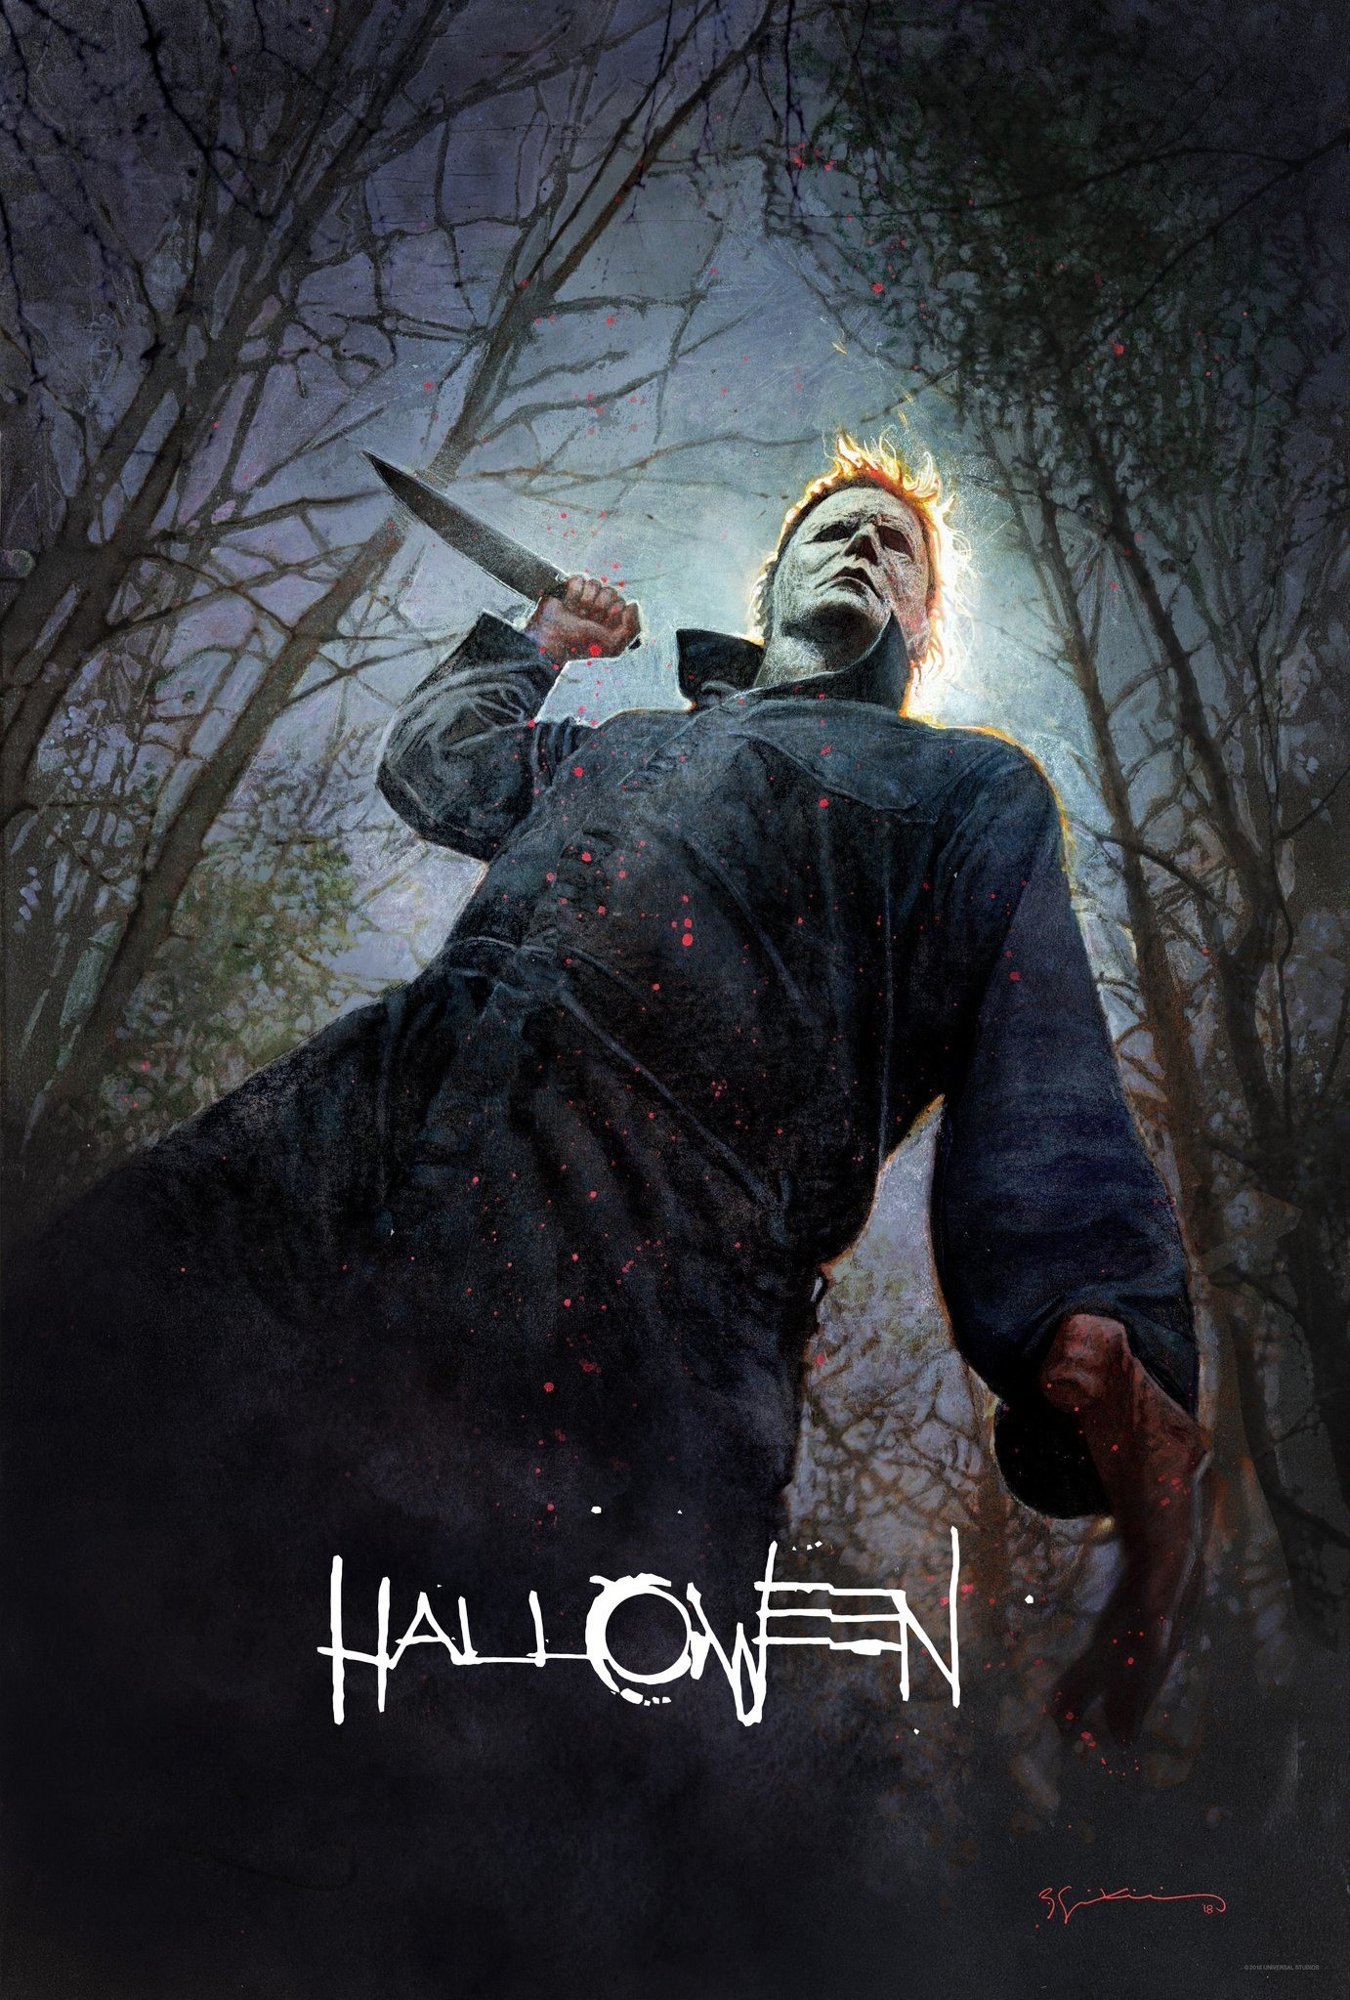 Halloween (2018) Pictures, Trailer, Reviews, News, DVD and Soundtrack